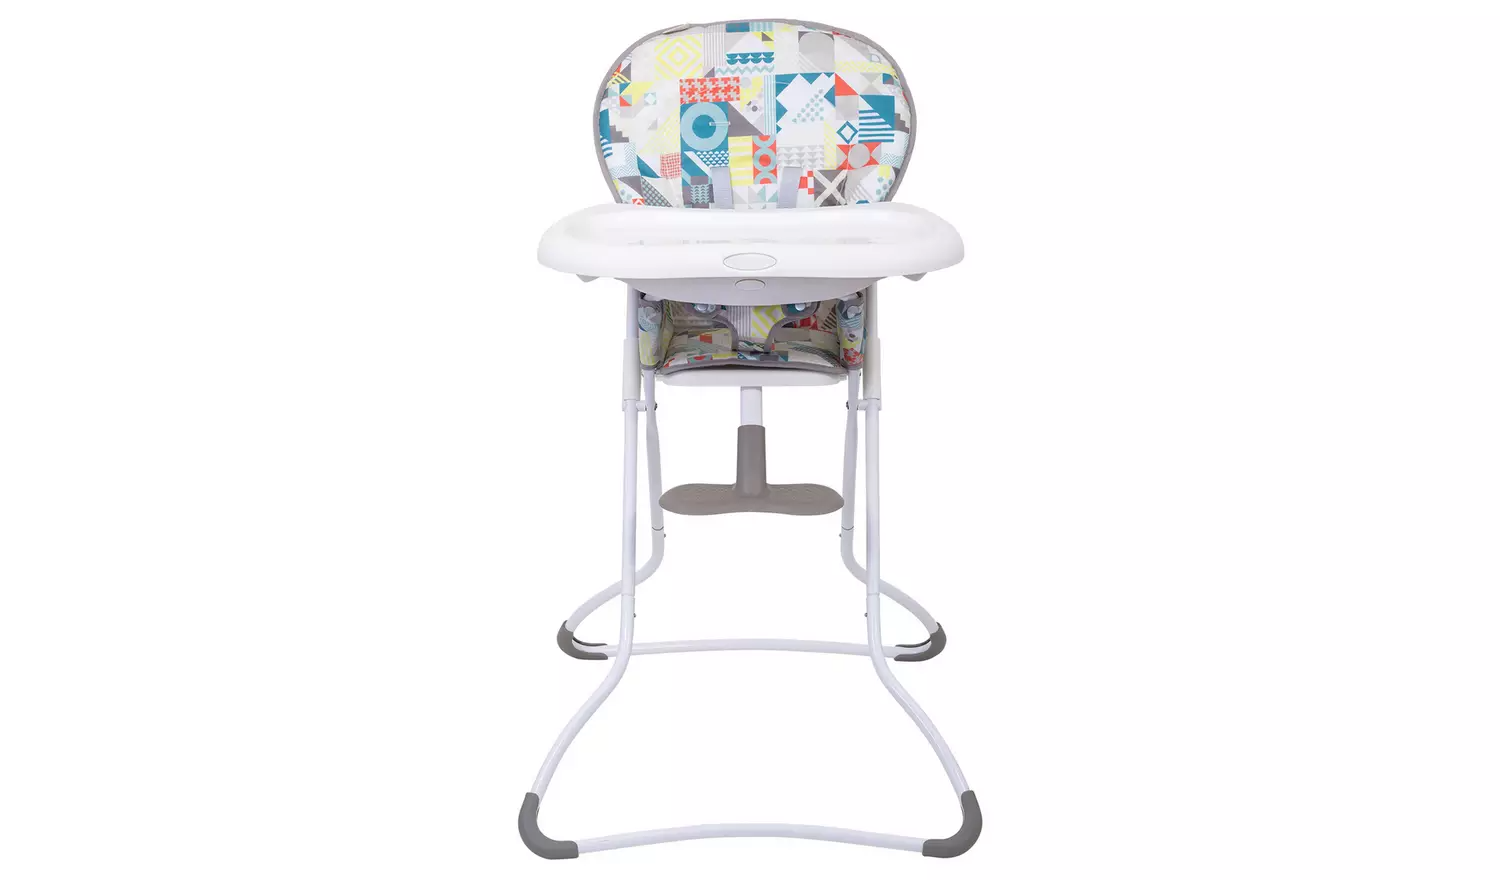 Graco Snack N Stow Highchair – Patchwork